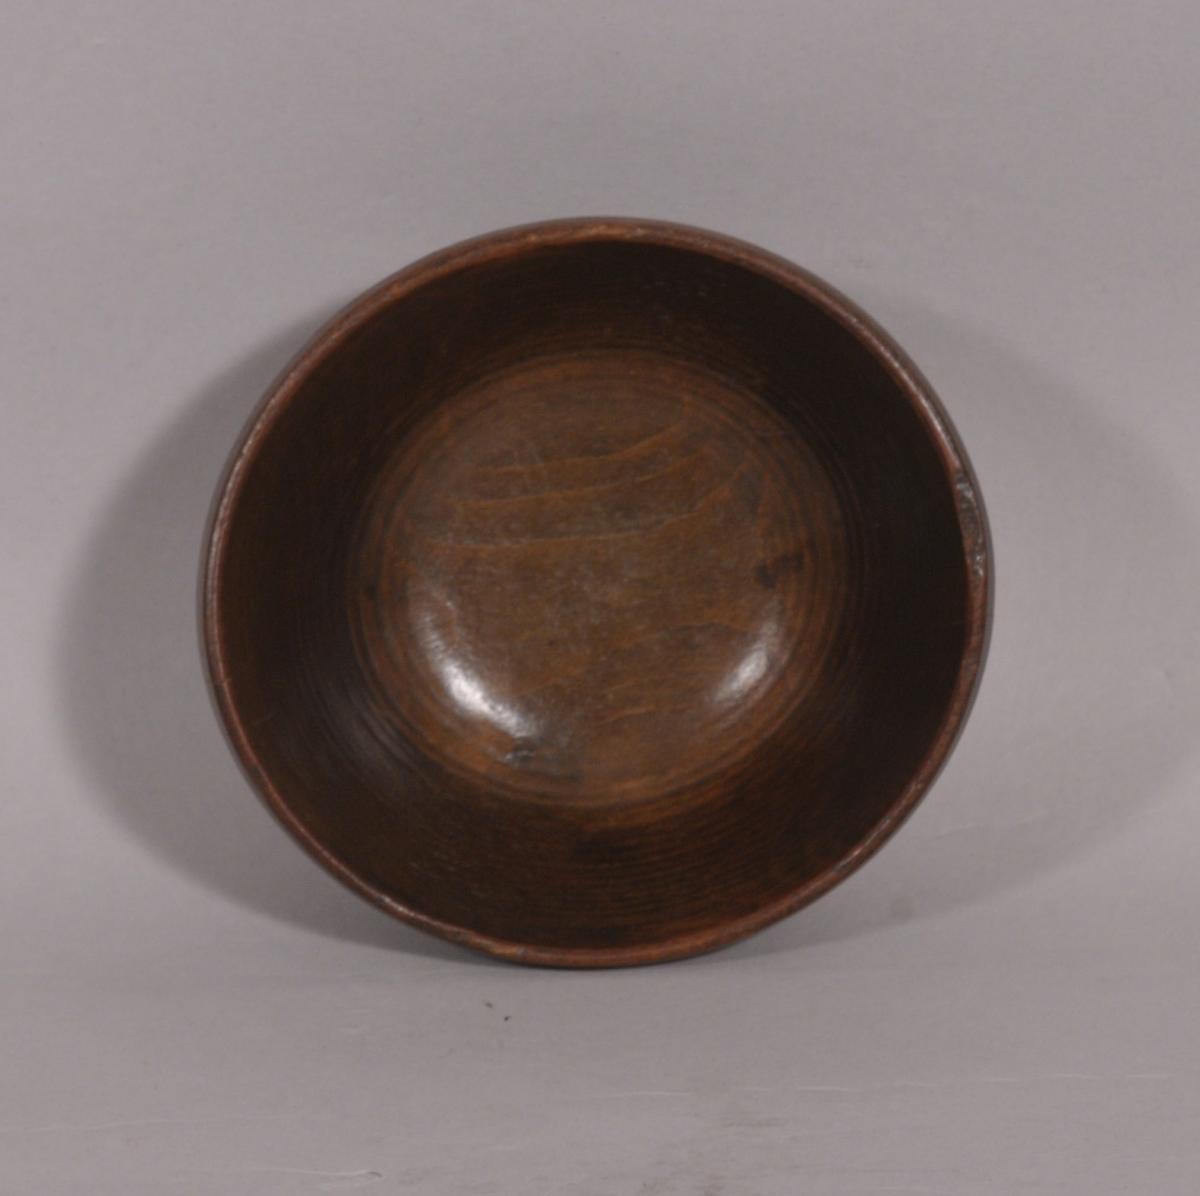 S/4184 Antique Treen Welsh Beech Cawl Bowl of the Georgian Period